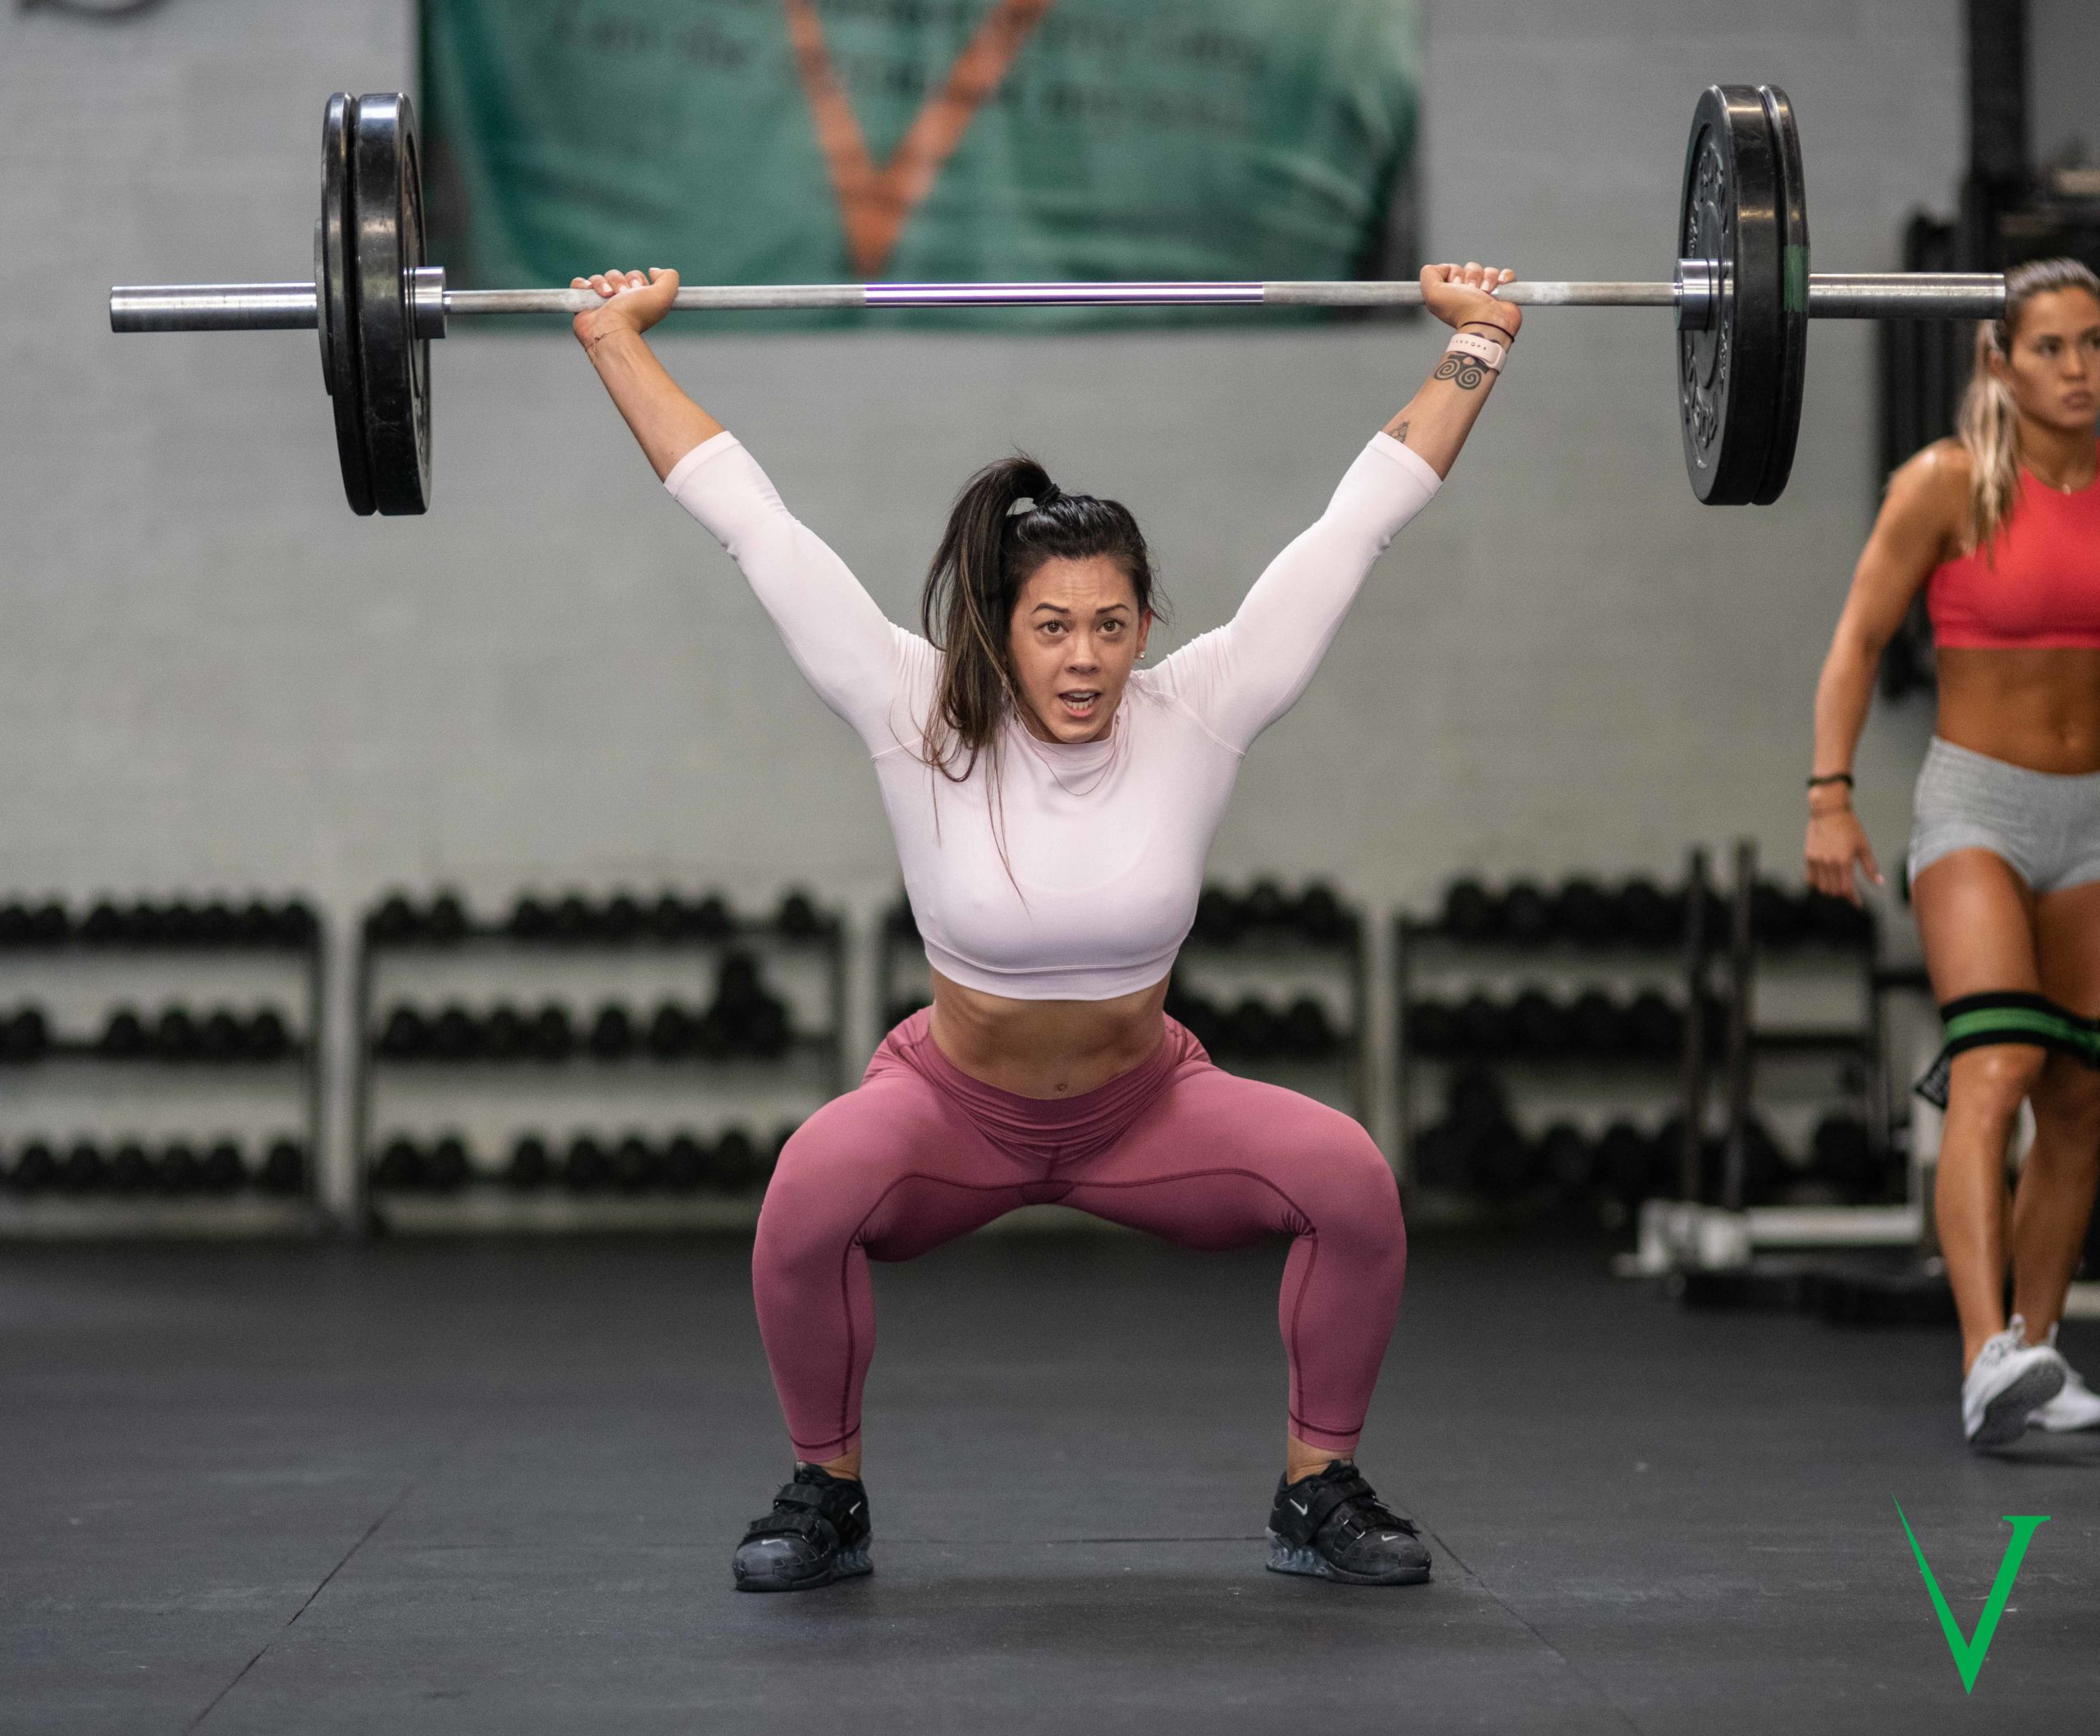 Professional woman bodybuilder says '95% of men cannot lift as much as me